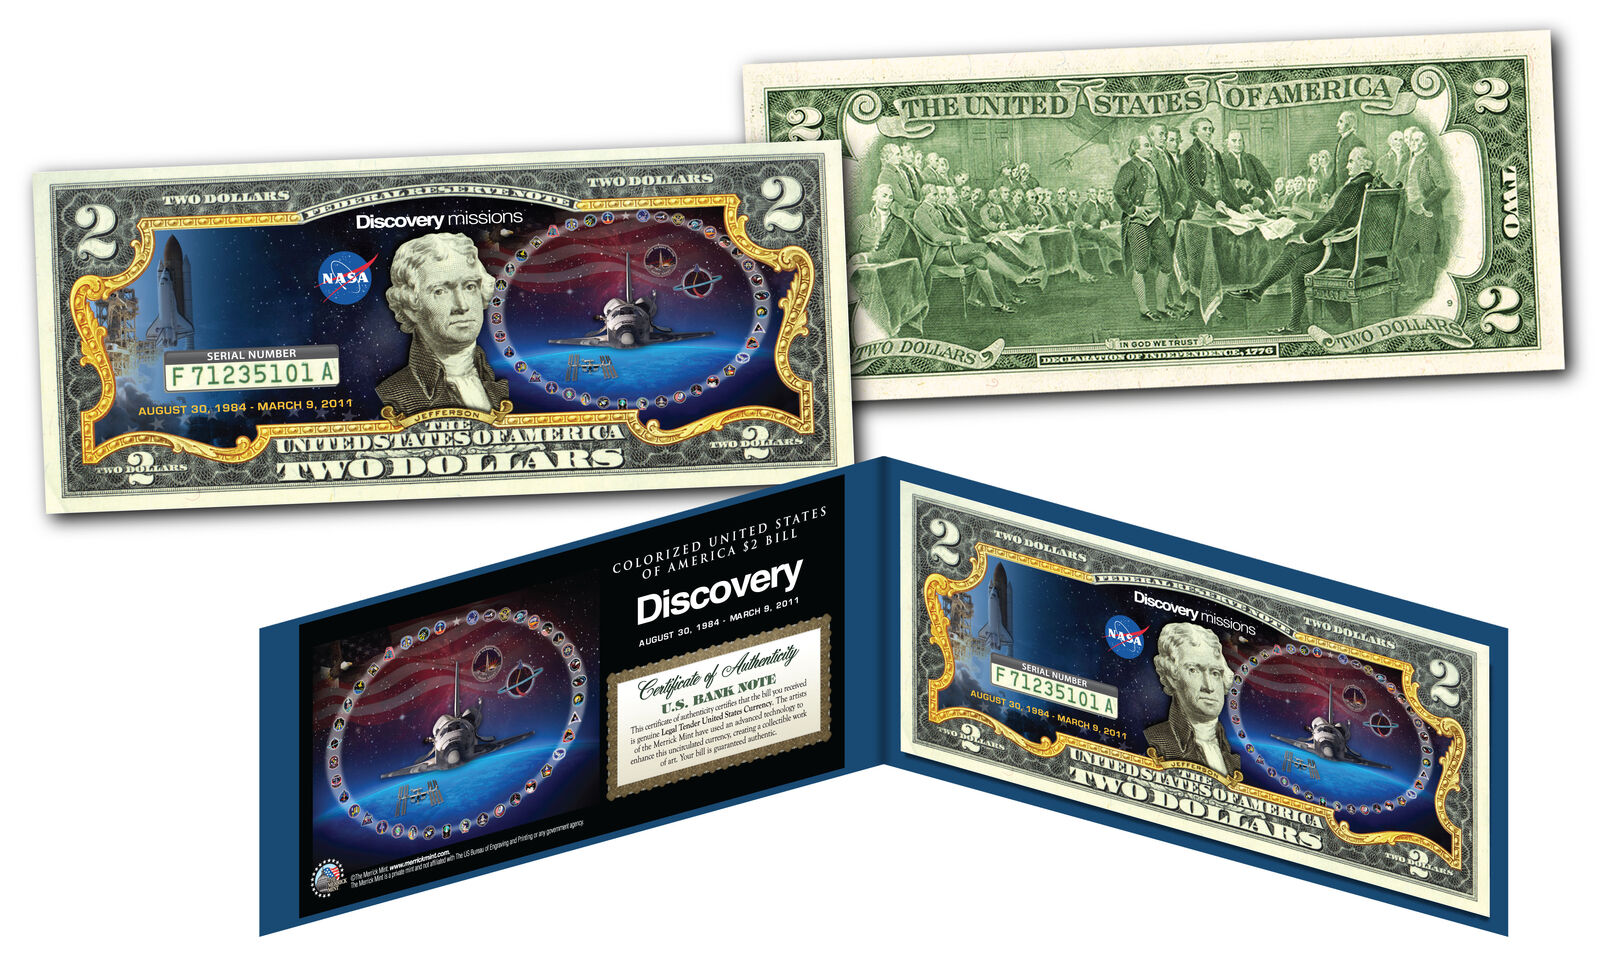 Space Shuttle DISCOVERY Missions Official Legal Tender U.S. $2 Bill NASA